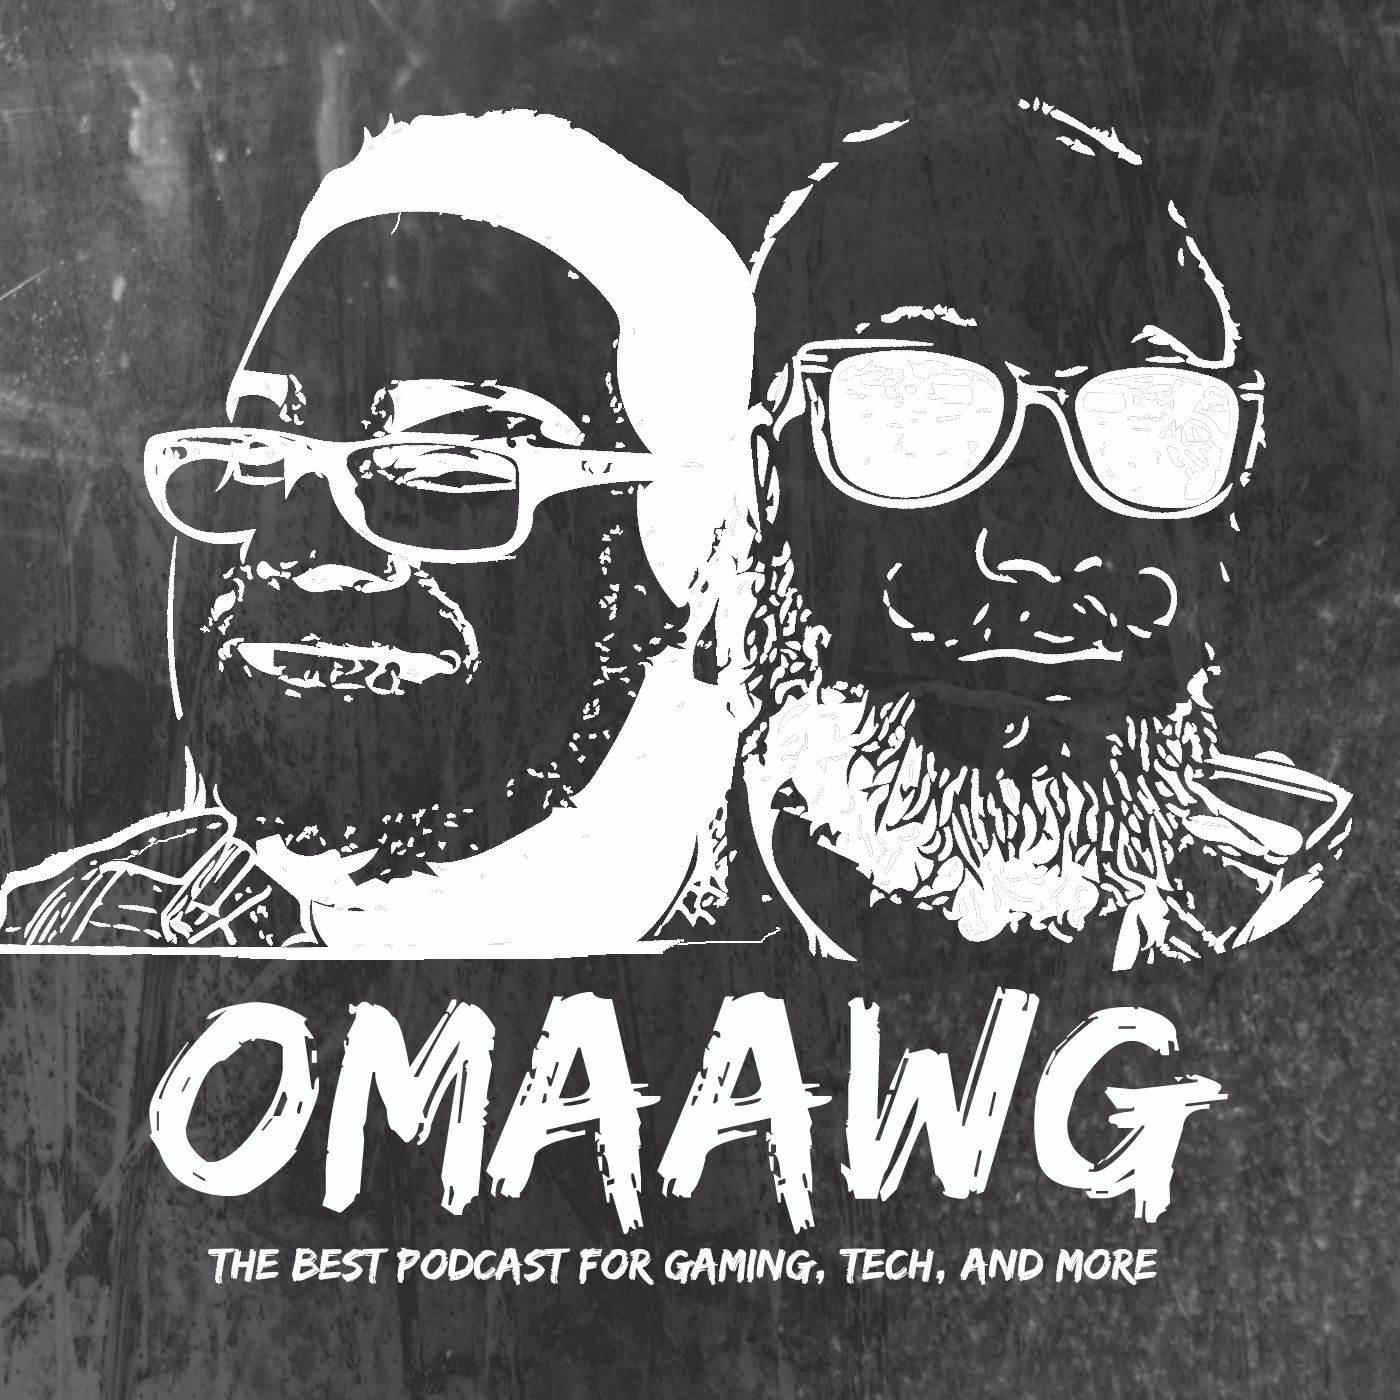 OMAAWG - The Best Podcast for Gaming, Tech, and More